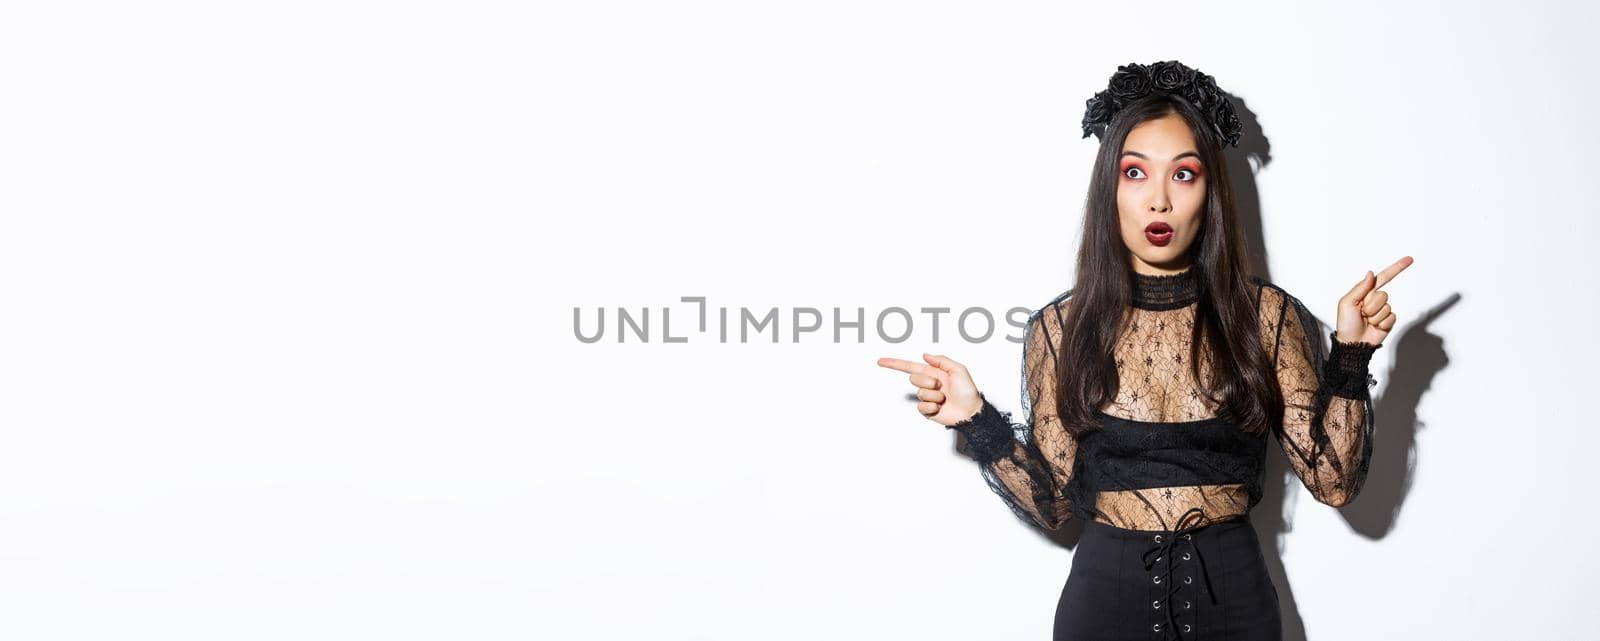 Amazed and startled woman in witch costume looking impressed, pointing fingers sideways but stare left, open mouth wondered, standing in black lace dress and wreath, white background by Benzoix